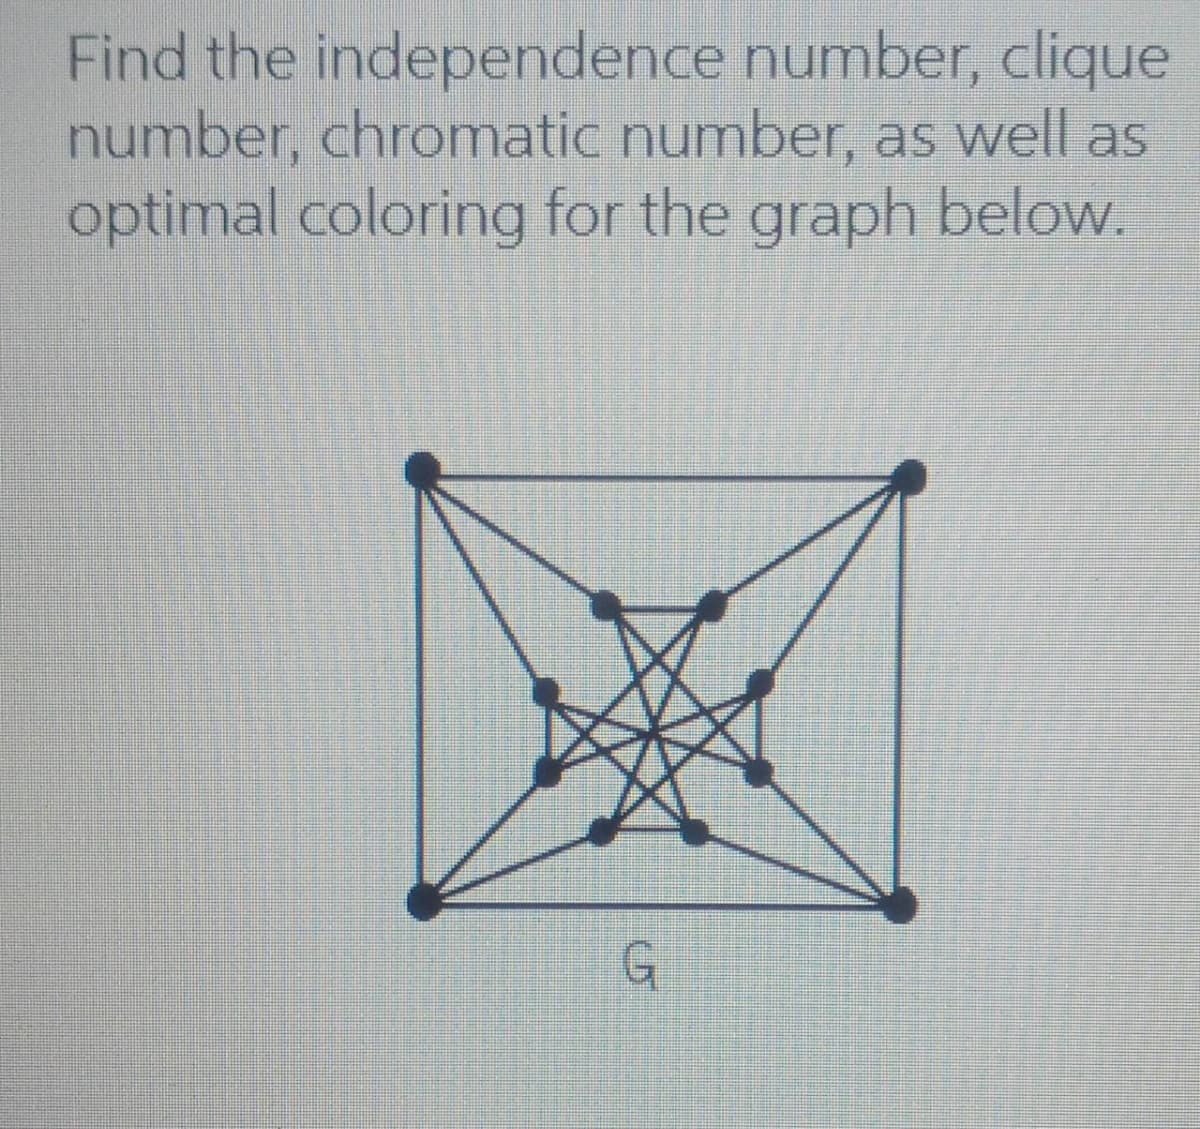 Find the
independence number, clique
number, chromatic number, as well as
optimal coloring for the graph below.
G